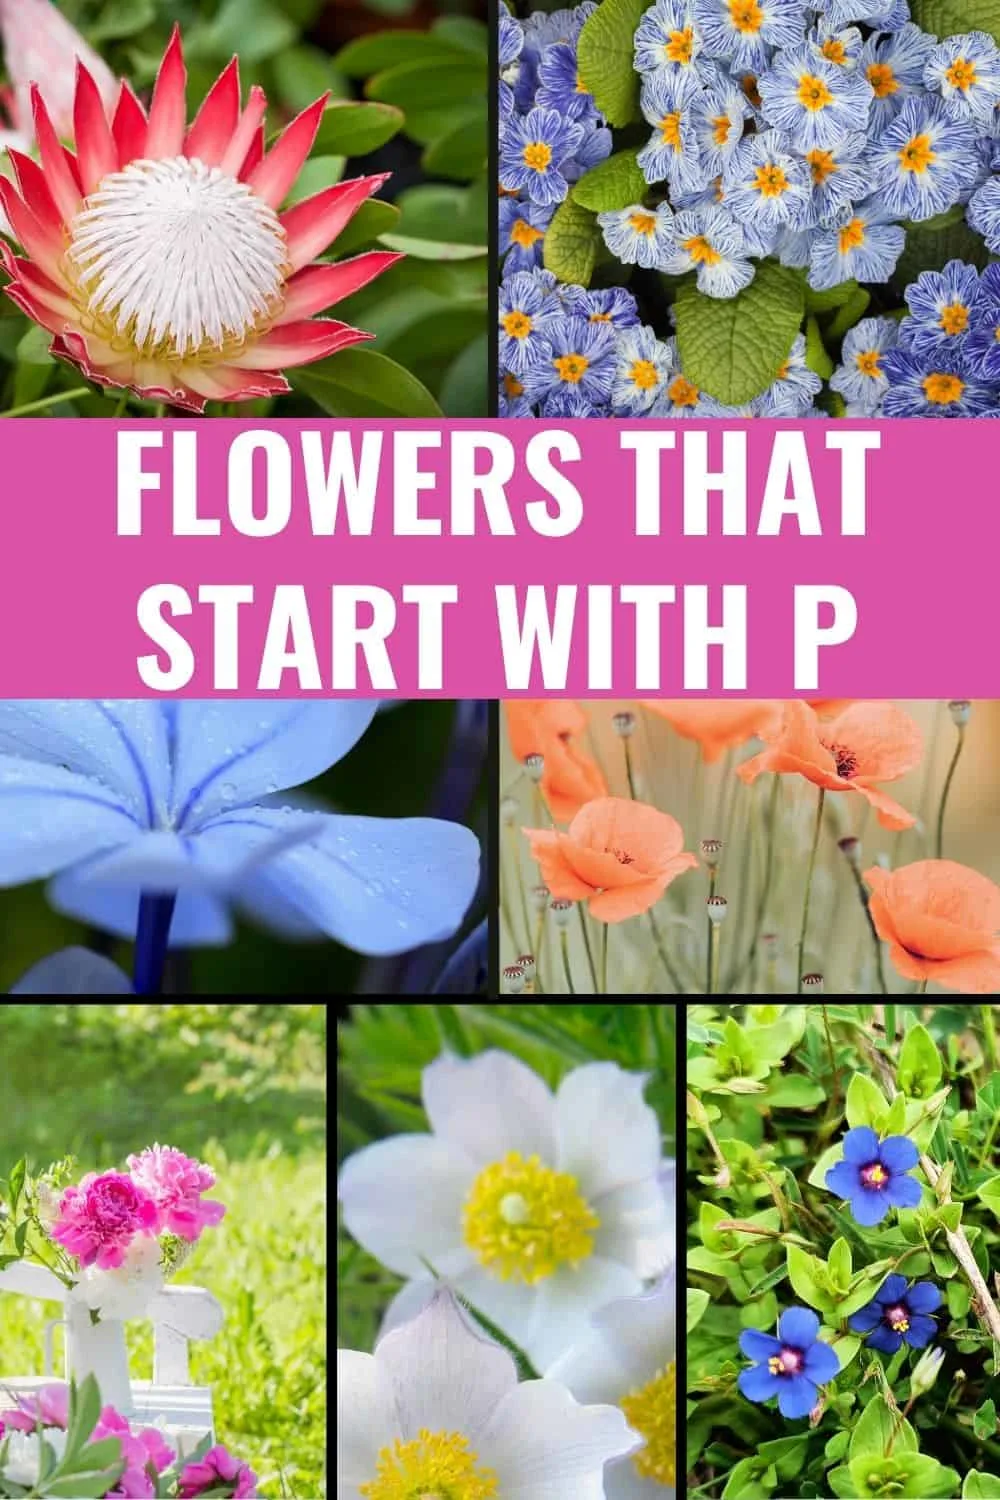 Flowers that start with p